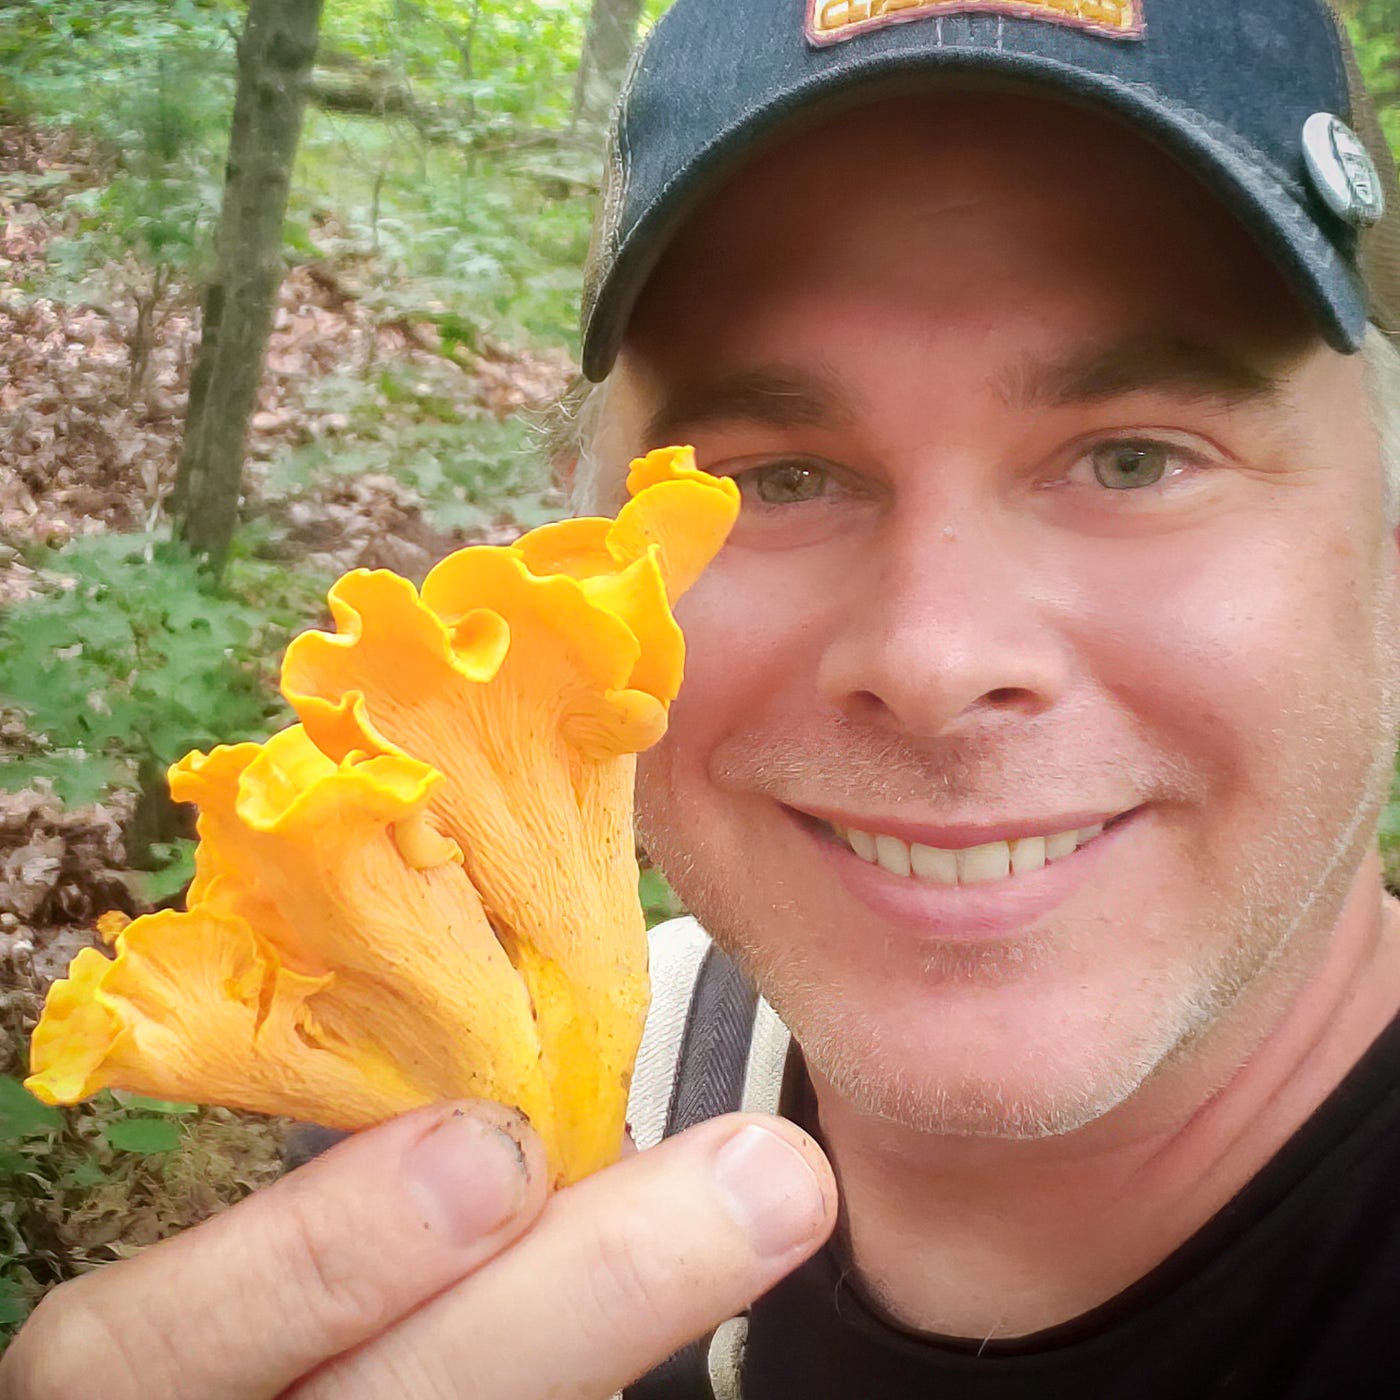 Hands cleaning chanterelle mushroom with pastry brush